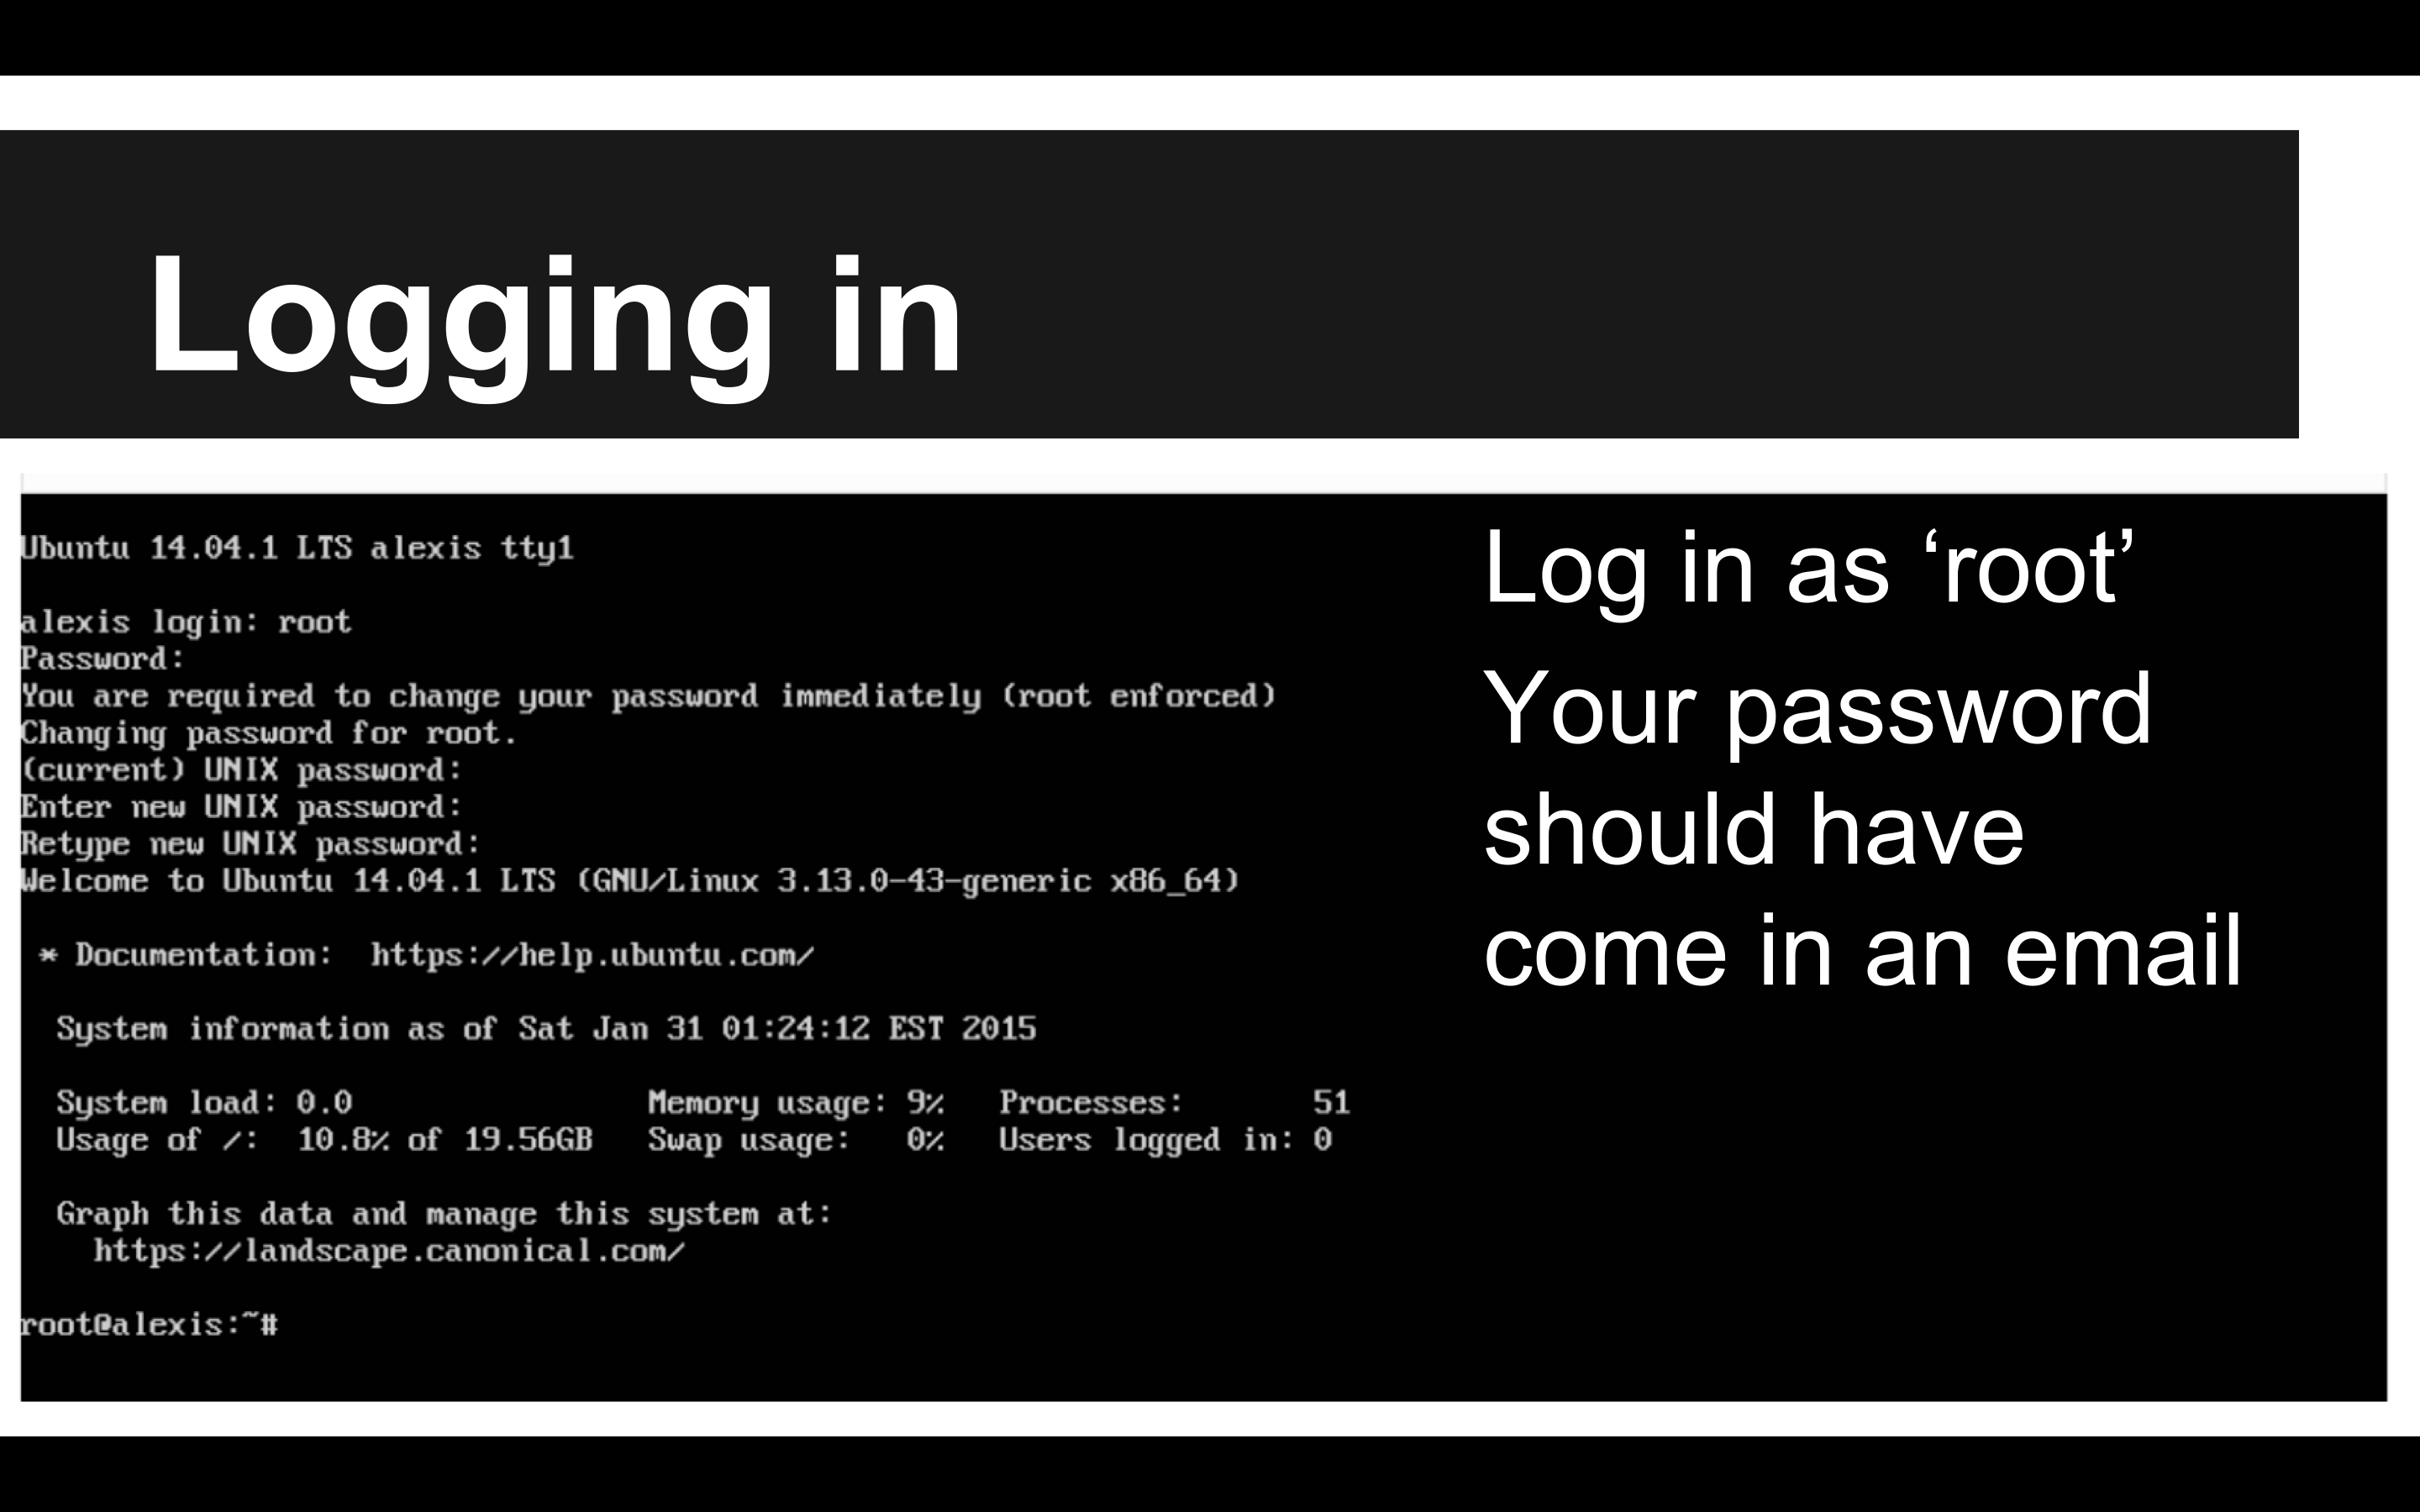 Screenshot of console - logging in as root